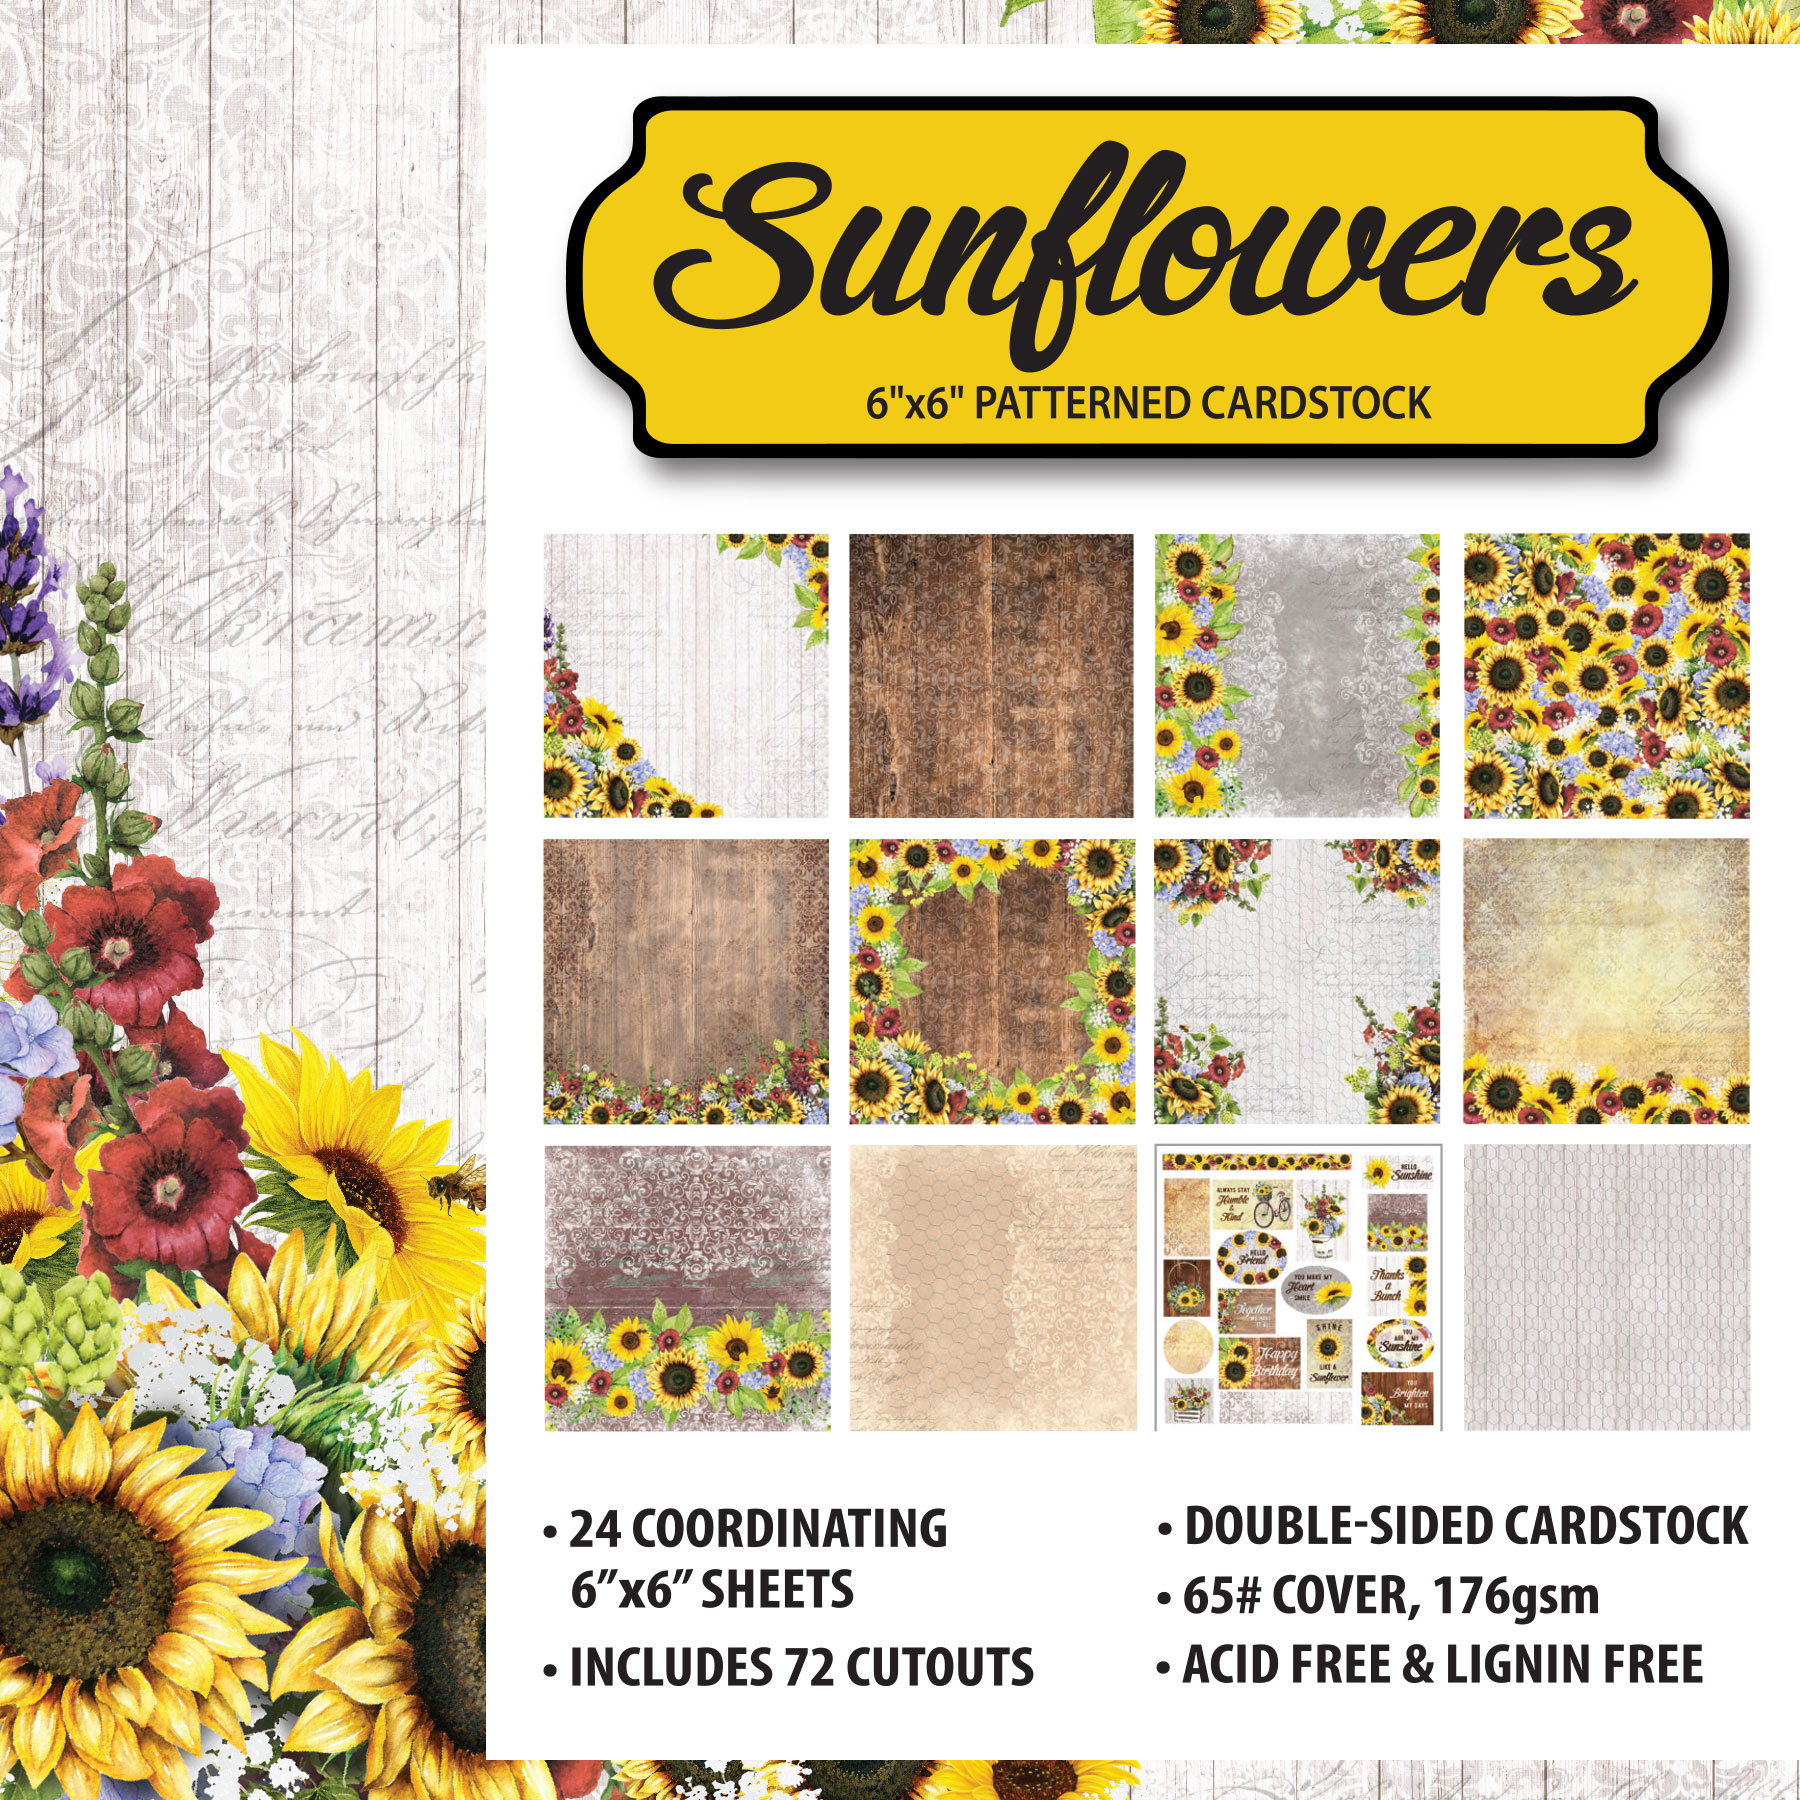 Sunflowers 6x6 Patterned Cardstock